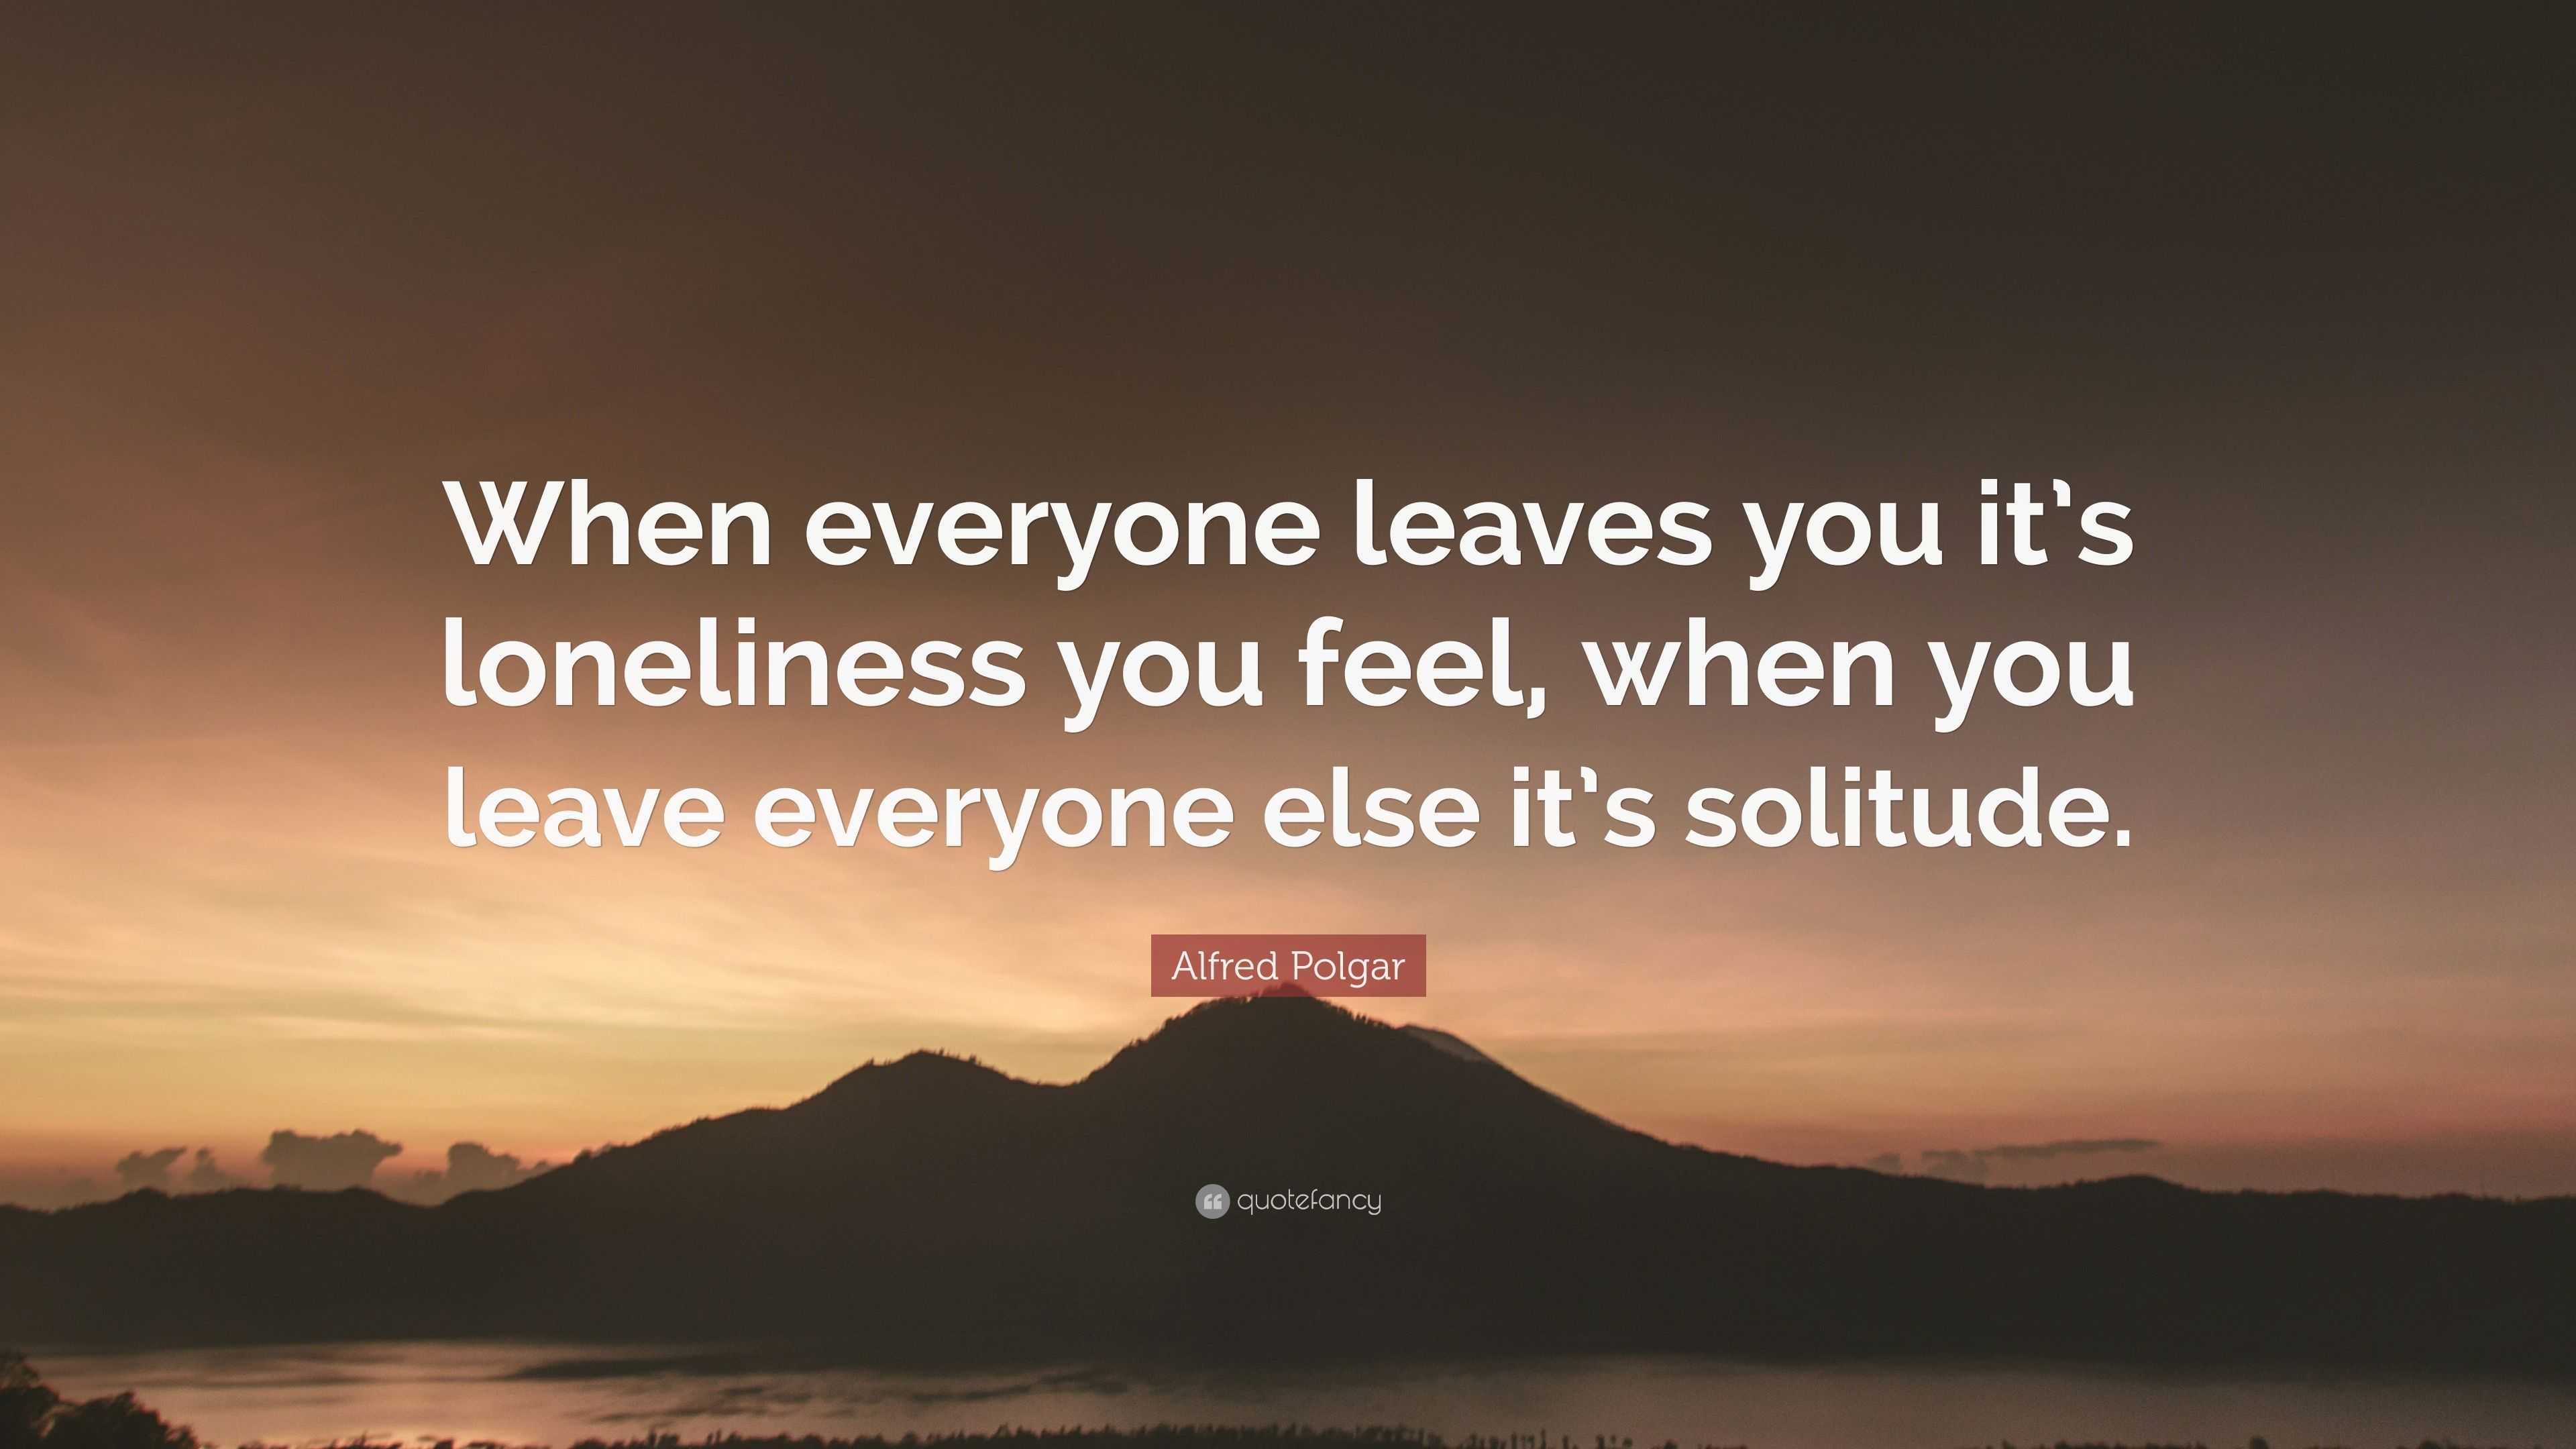 Alfred Polgar Quote: “When everyone leaves you it’s loneliness you feel ...